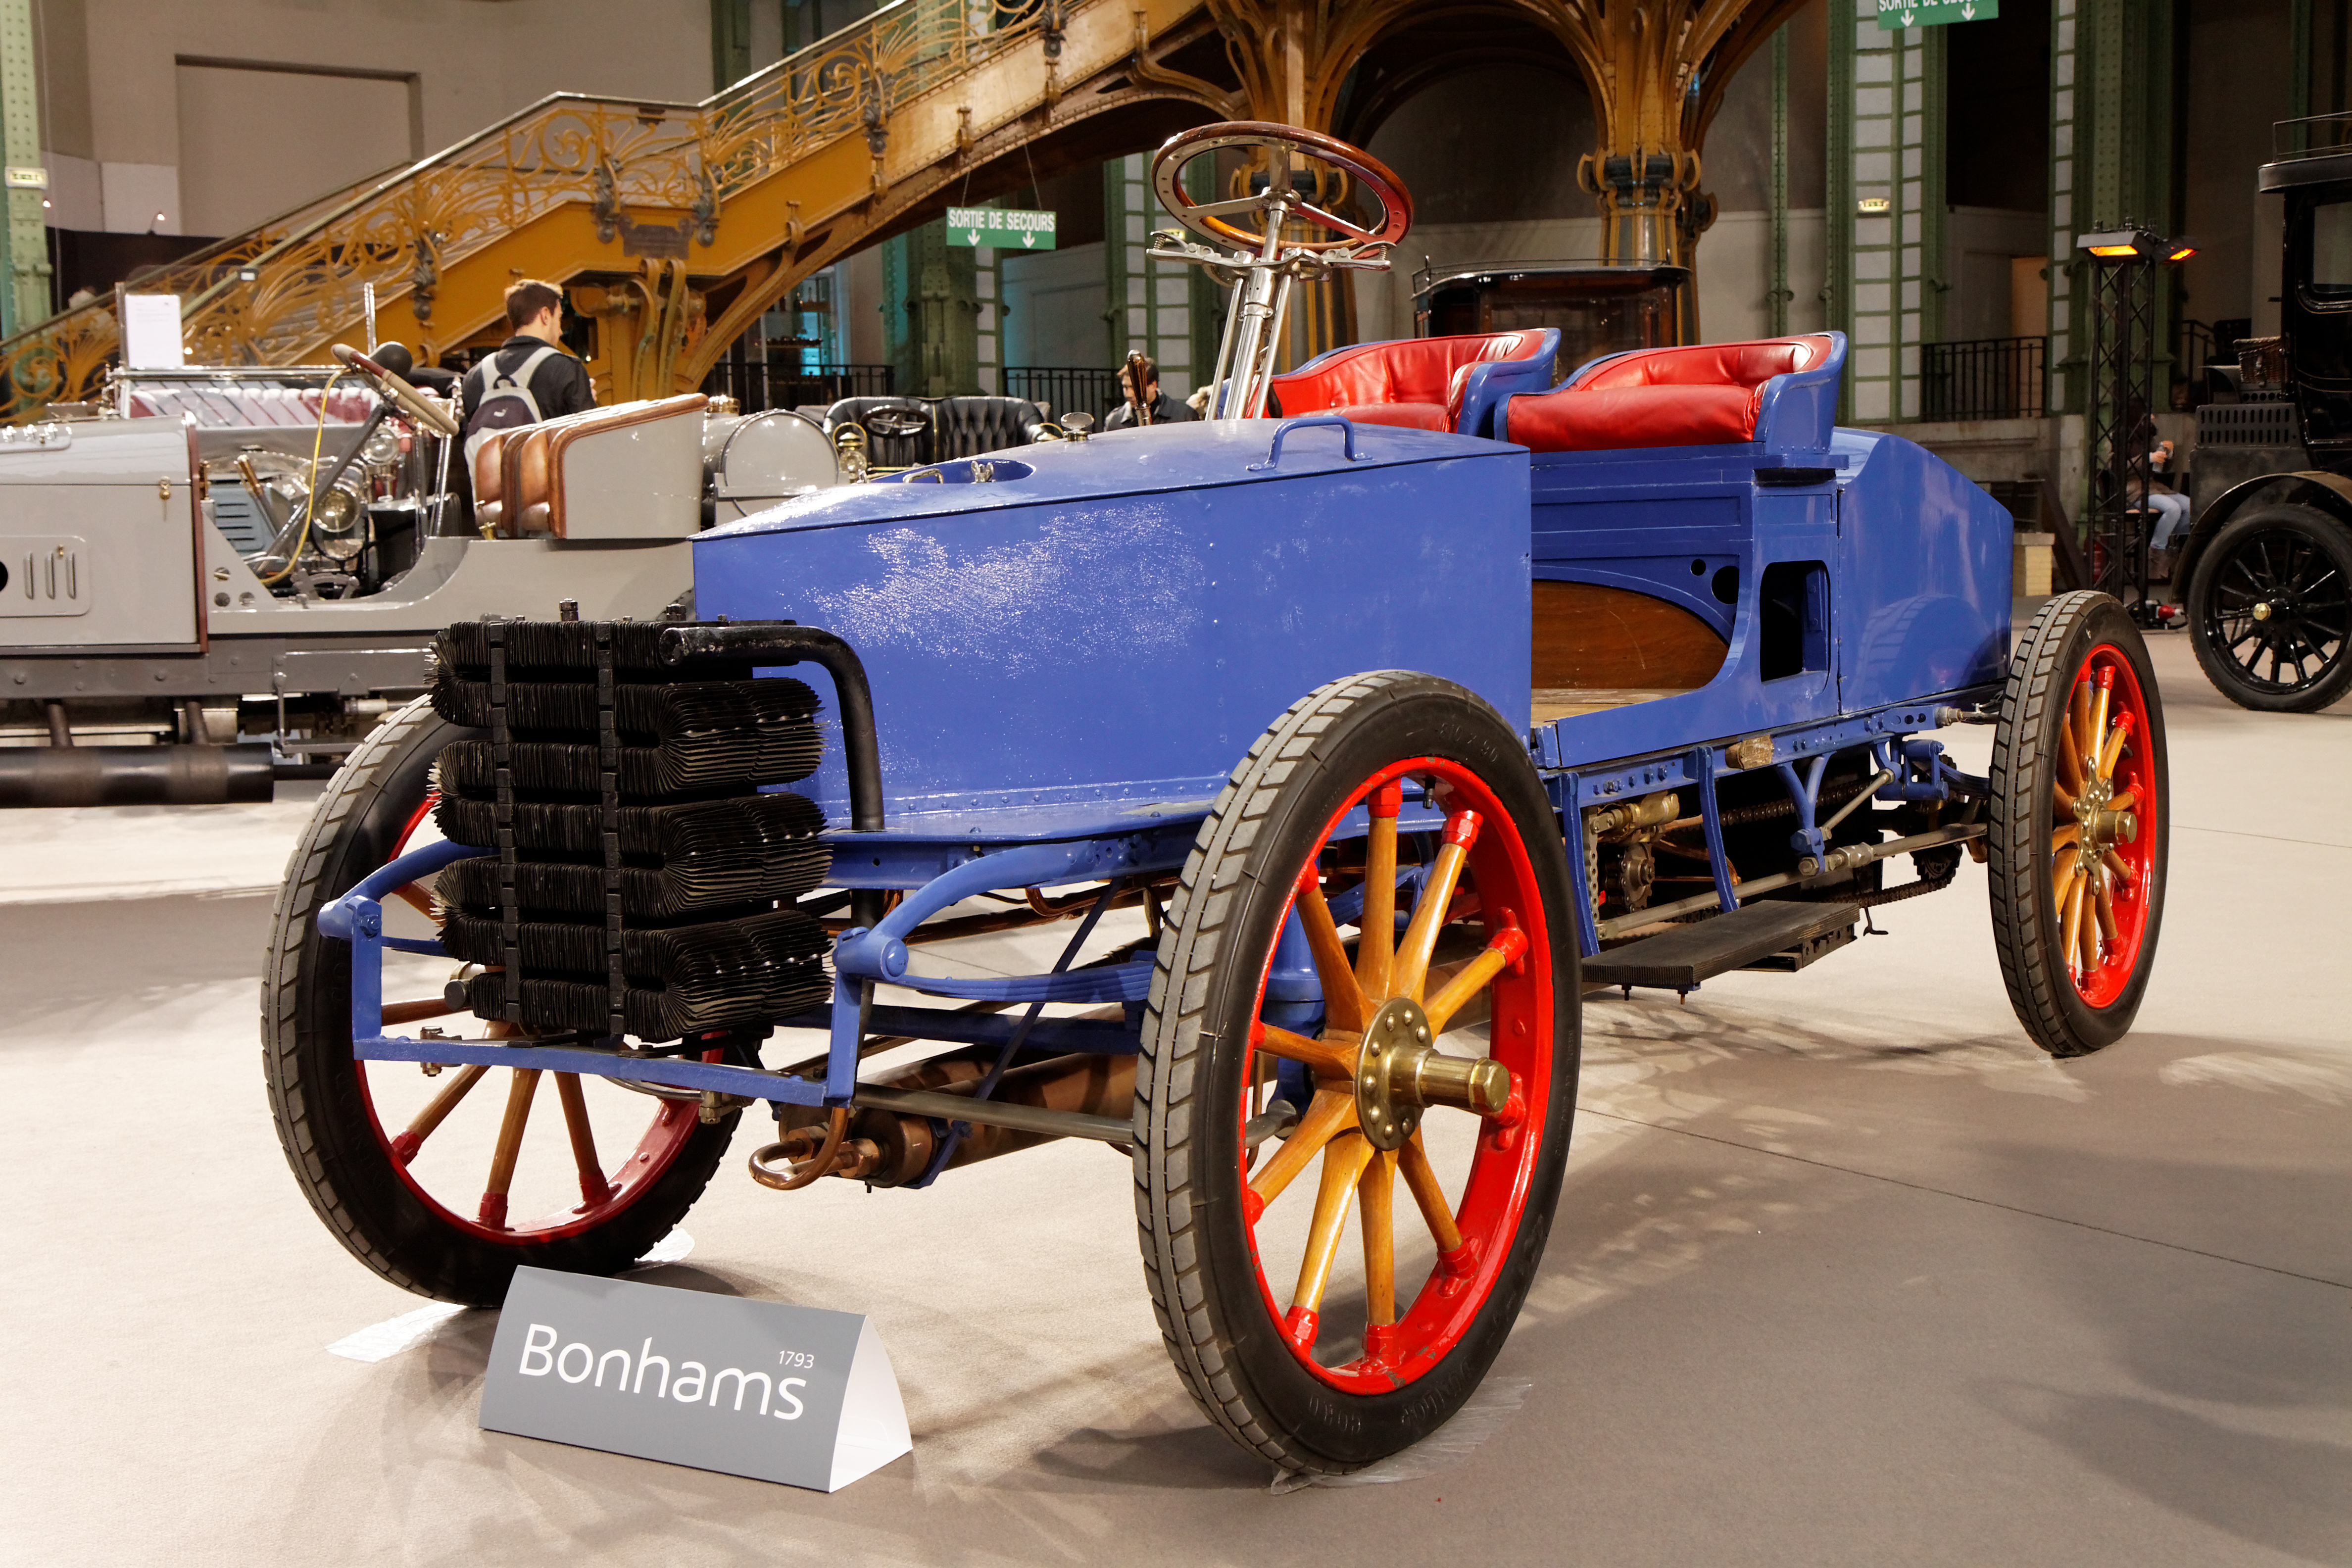 Vehicles powered by steam фото 22